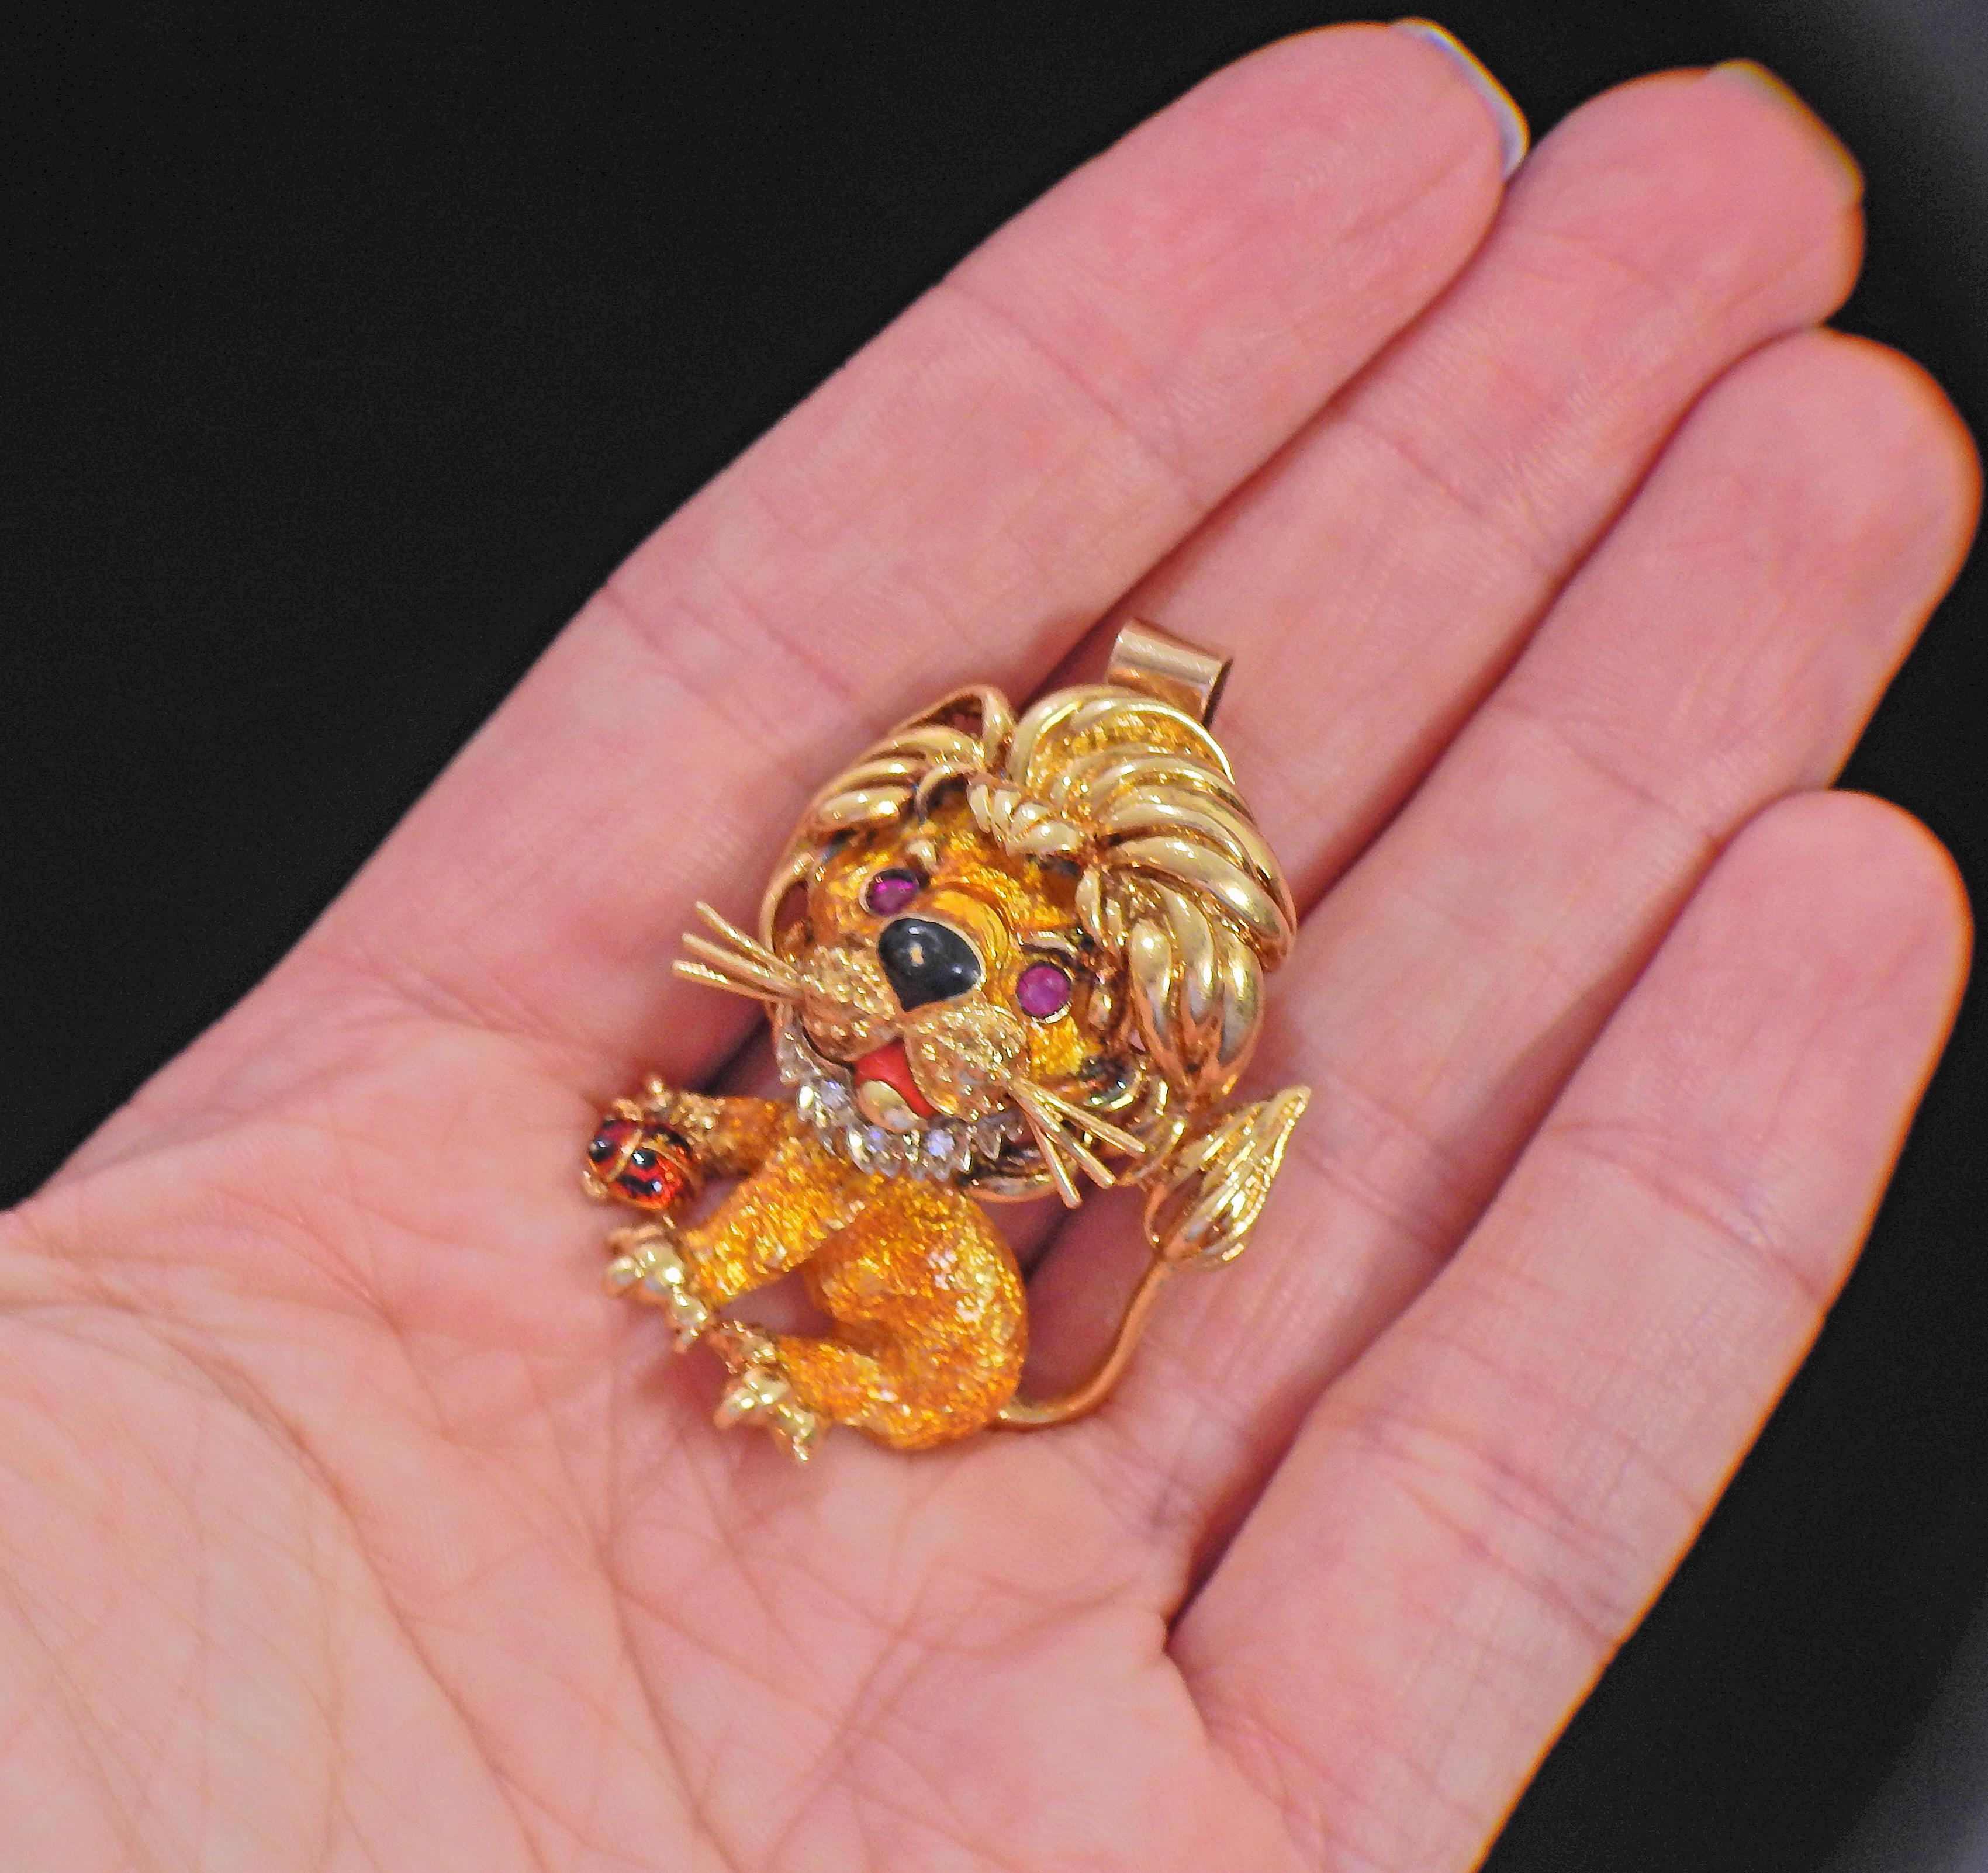 Frascarolo Enamel Diamond Ruby Gold Lion Pendant In Excellent Condition For Sale In New York, NY